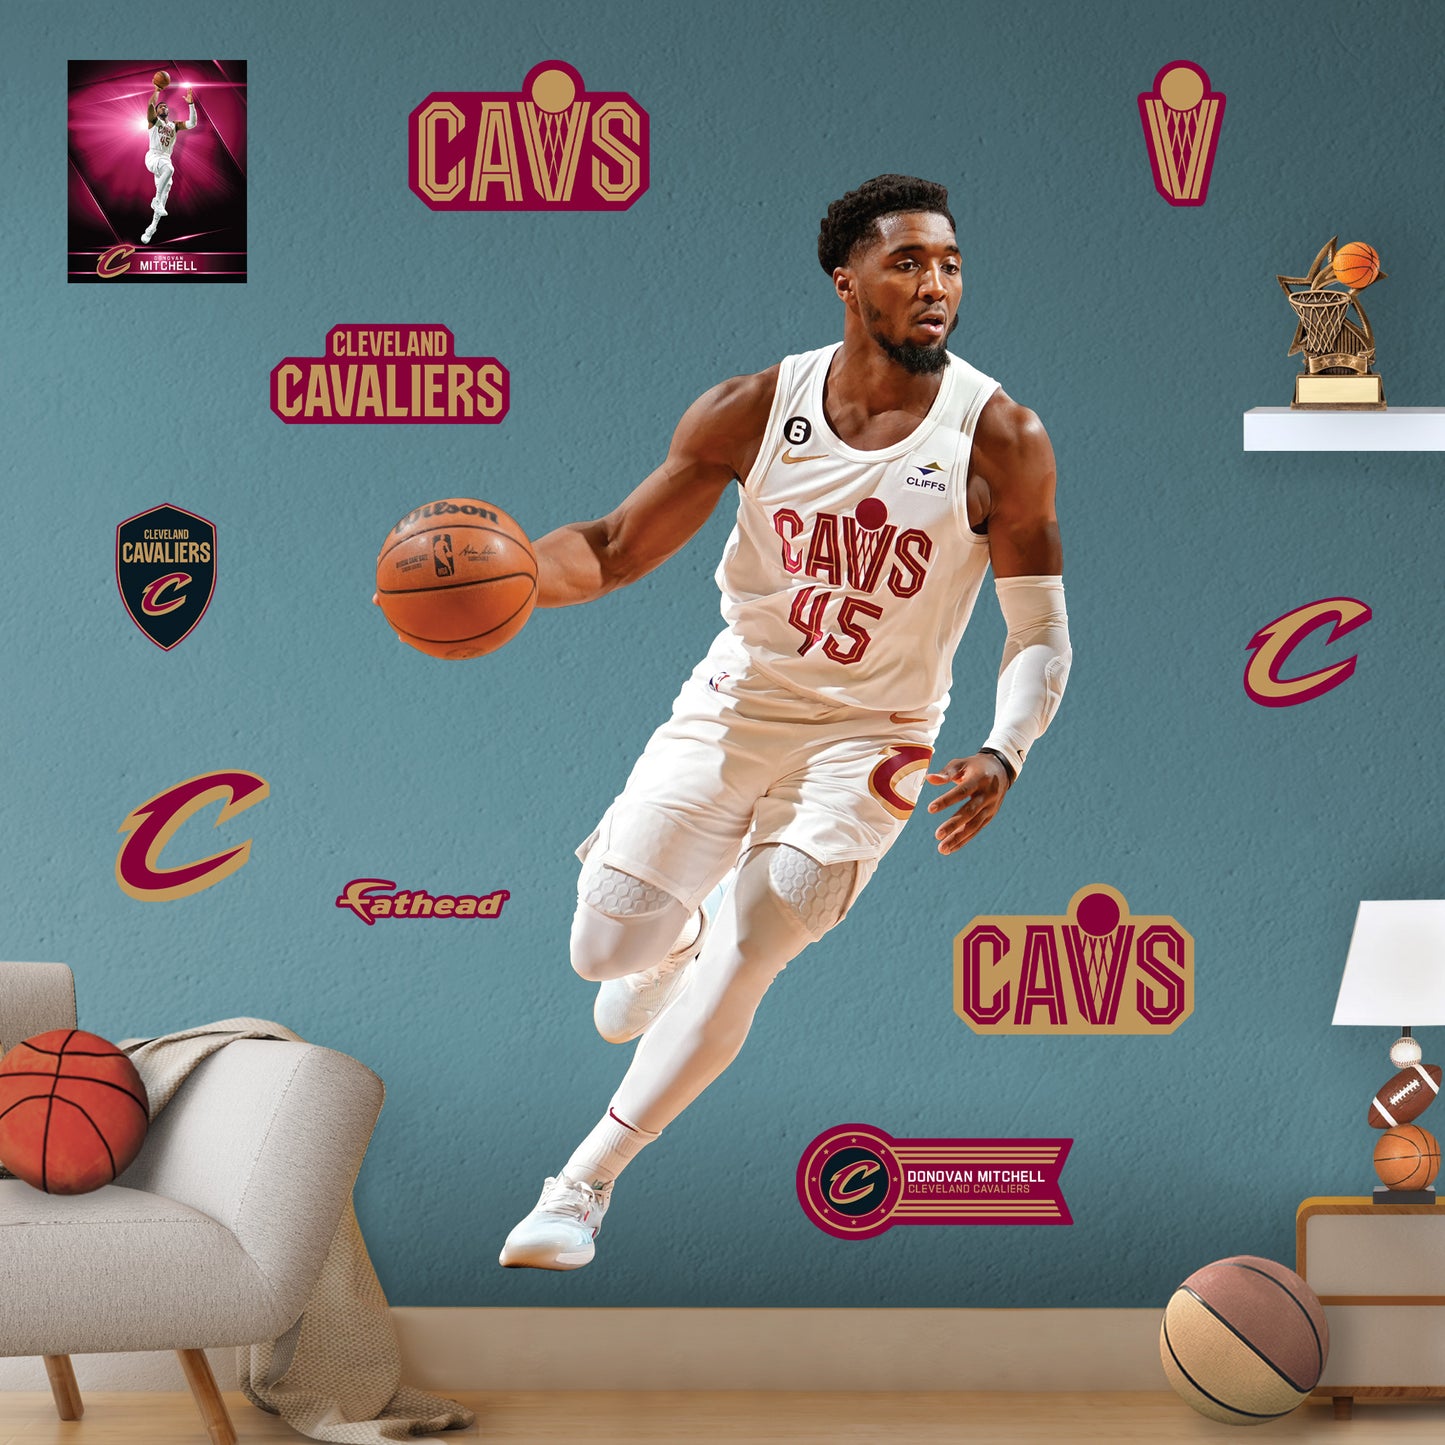 Donovan Mitchell Cleveland Cavaliers 2023 Icon Edition Youth NBA